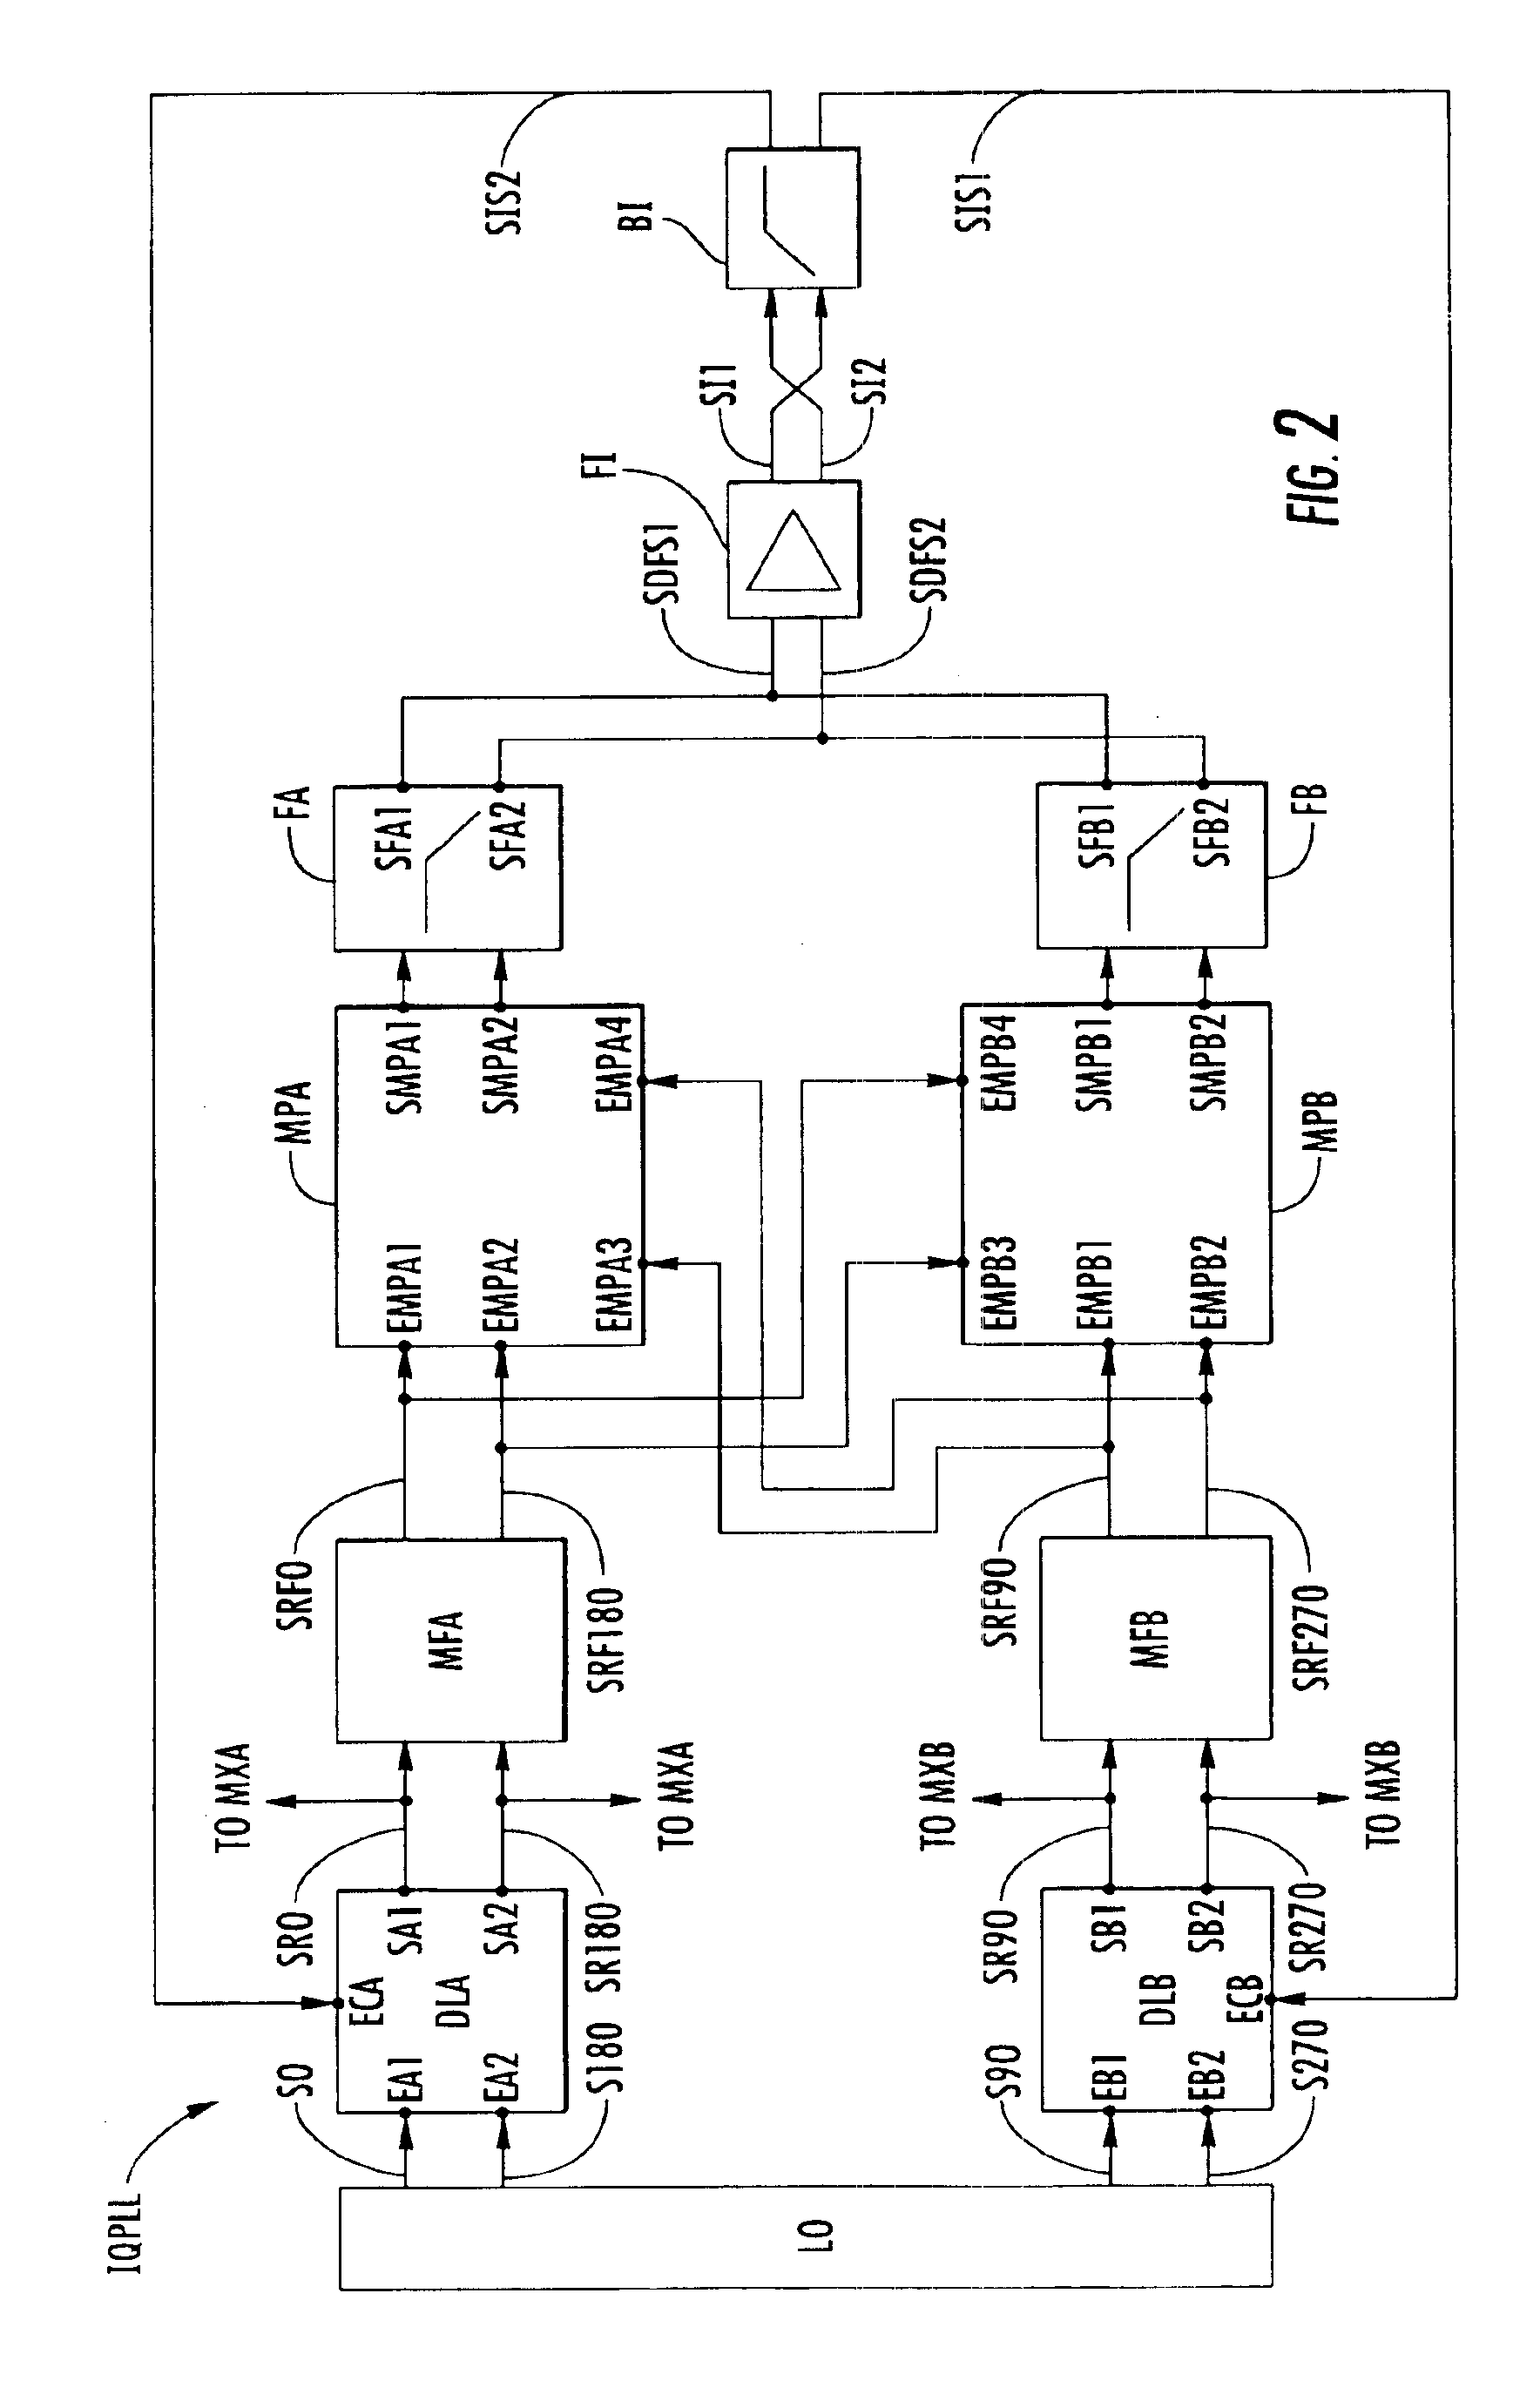 Process and device for controlling the phase shift between four signals mutually in phase quadrature